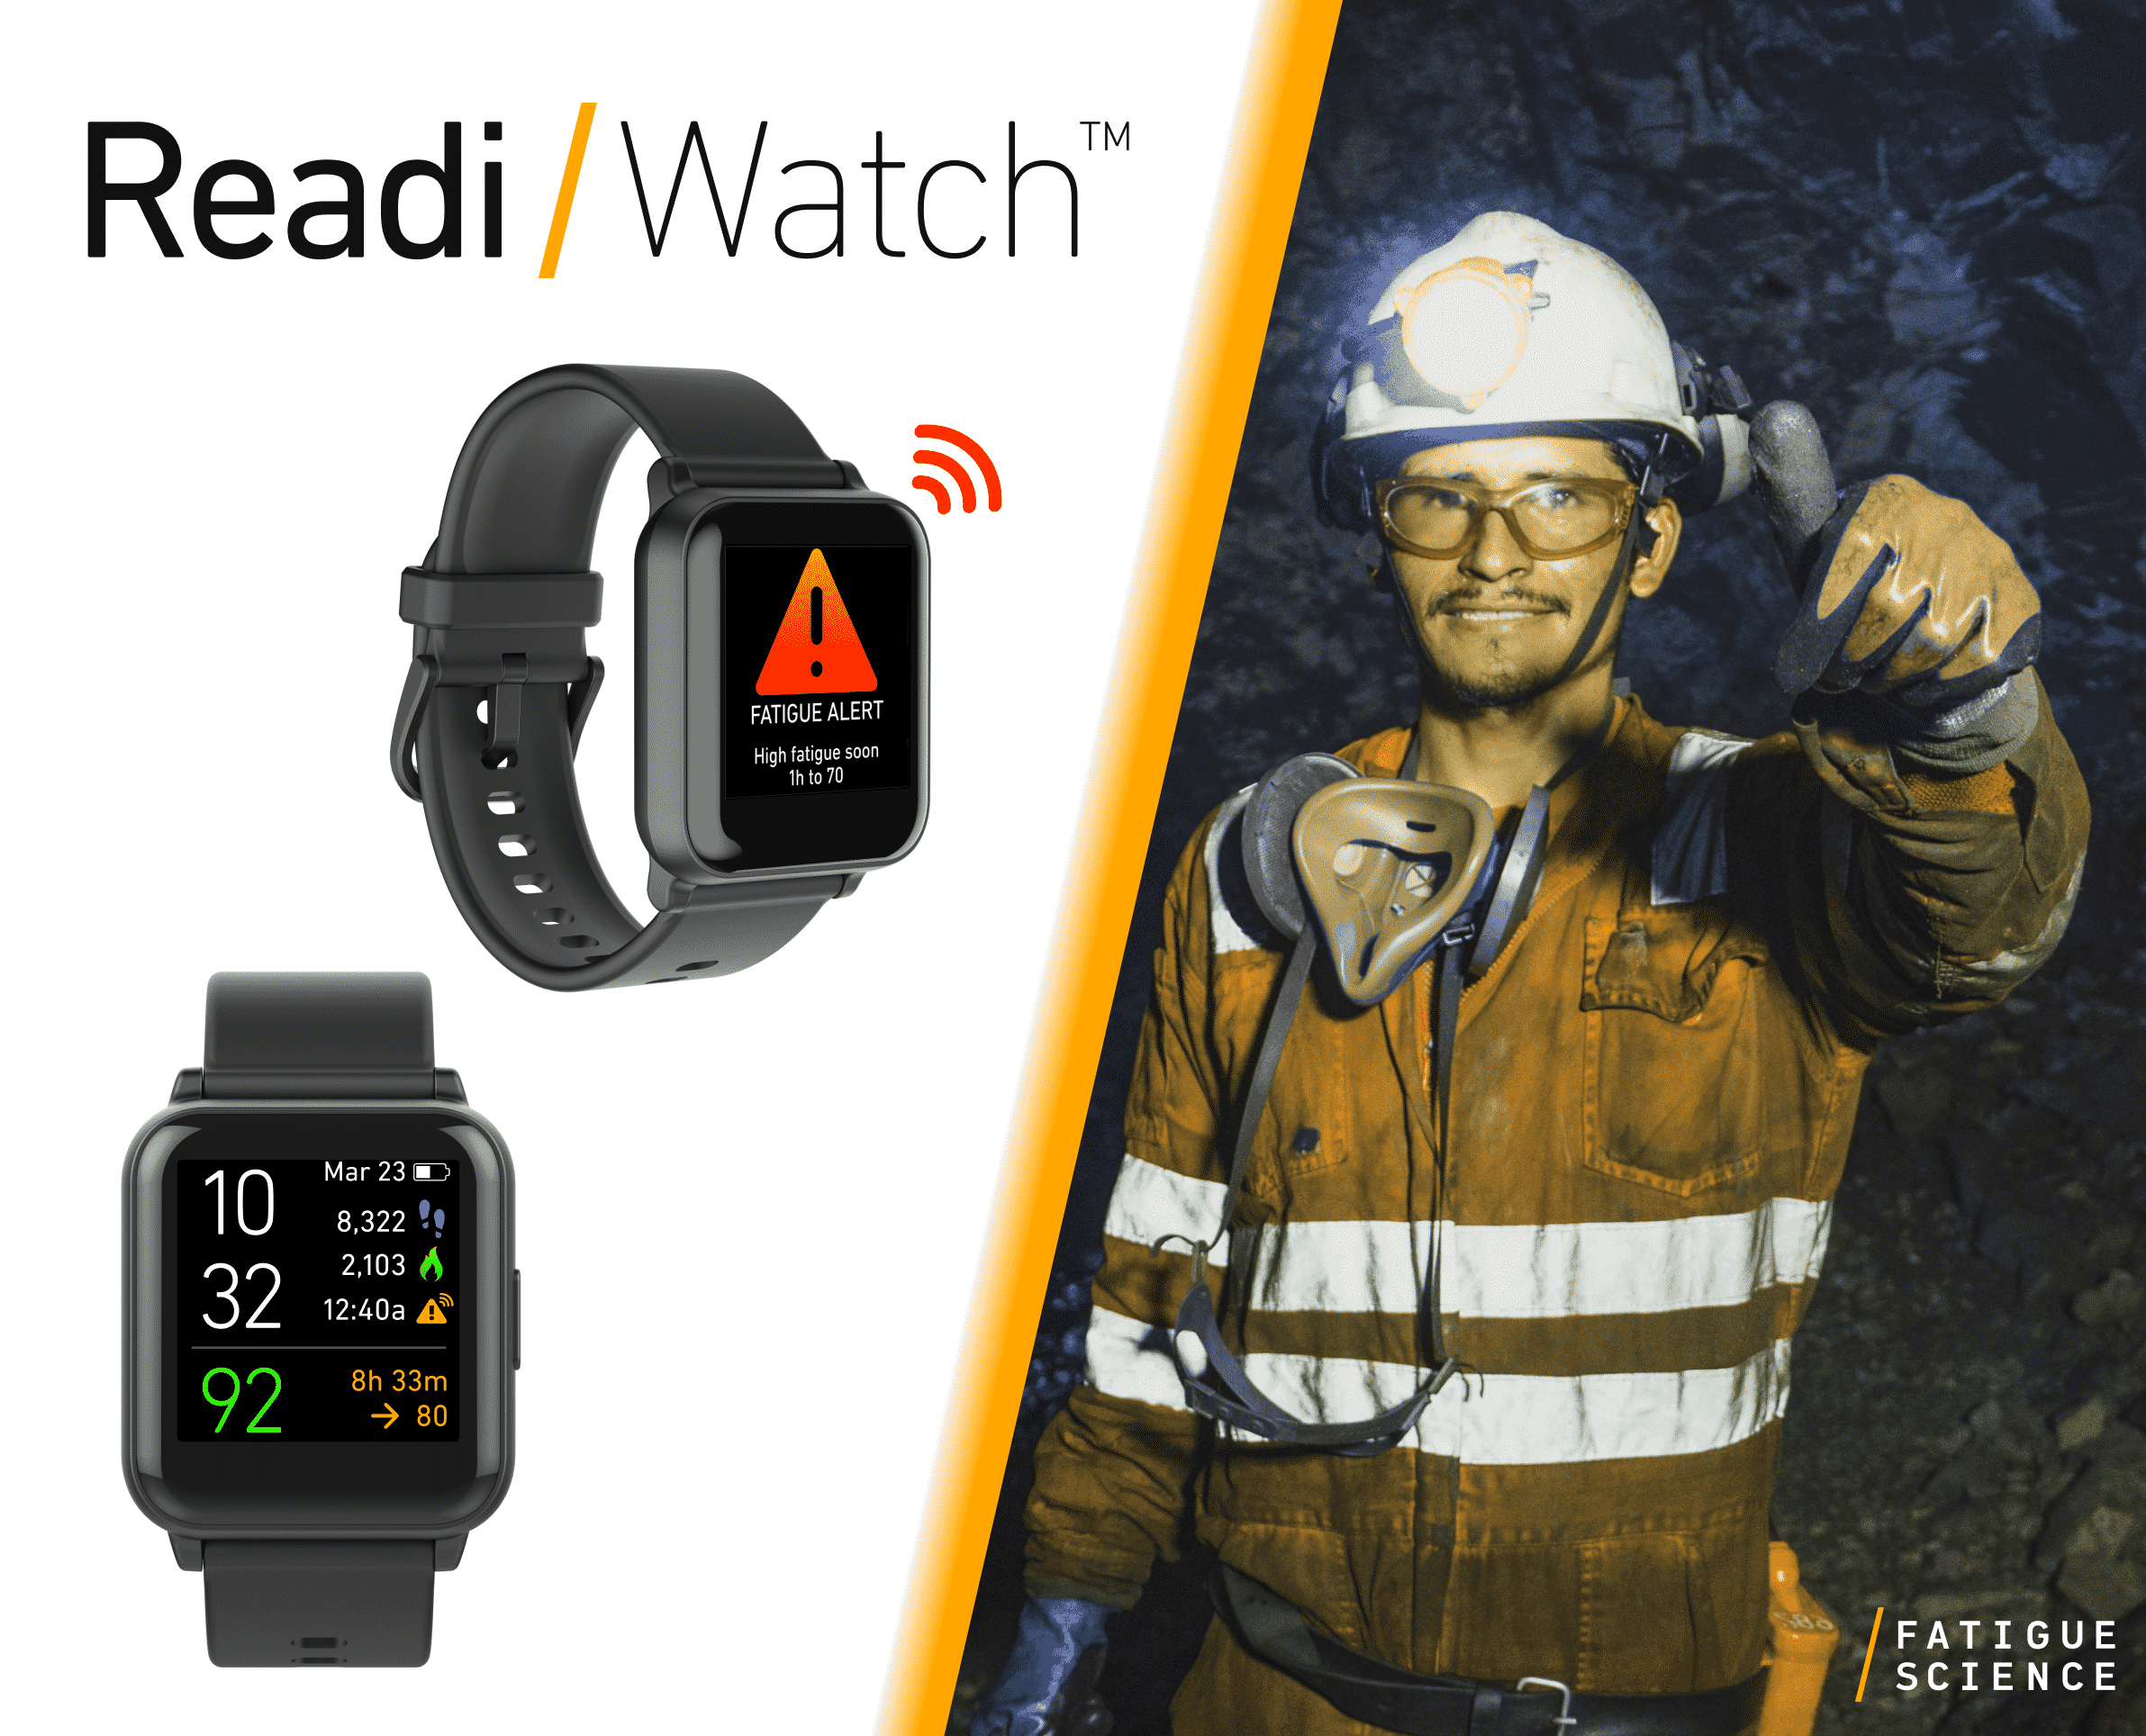 Image of ReadiWatch and a miner giving his thumbs up